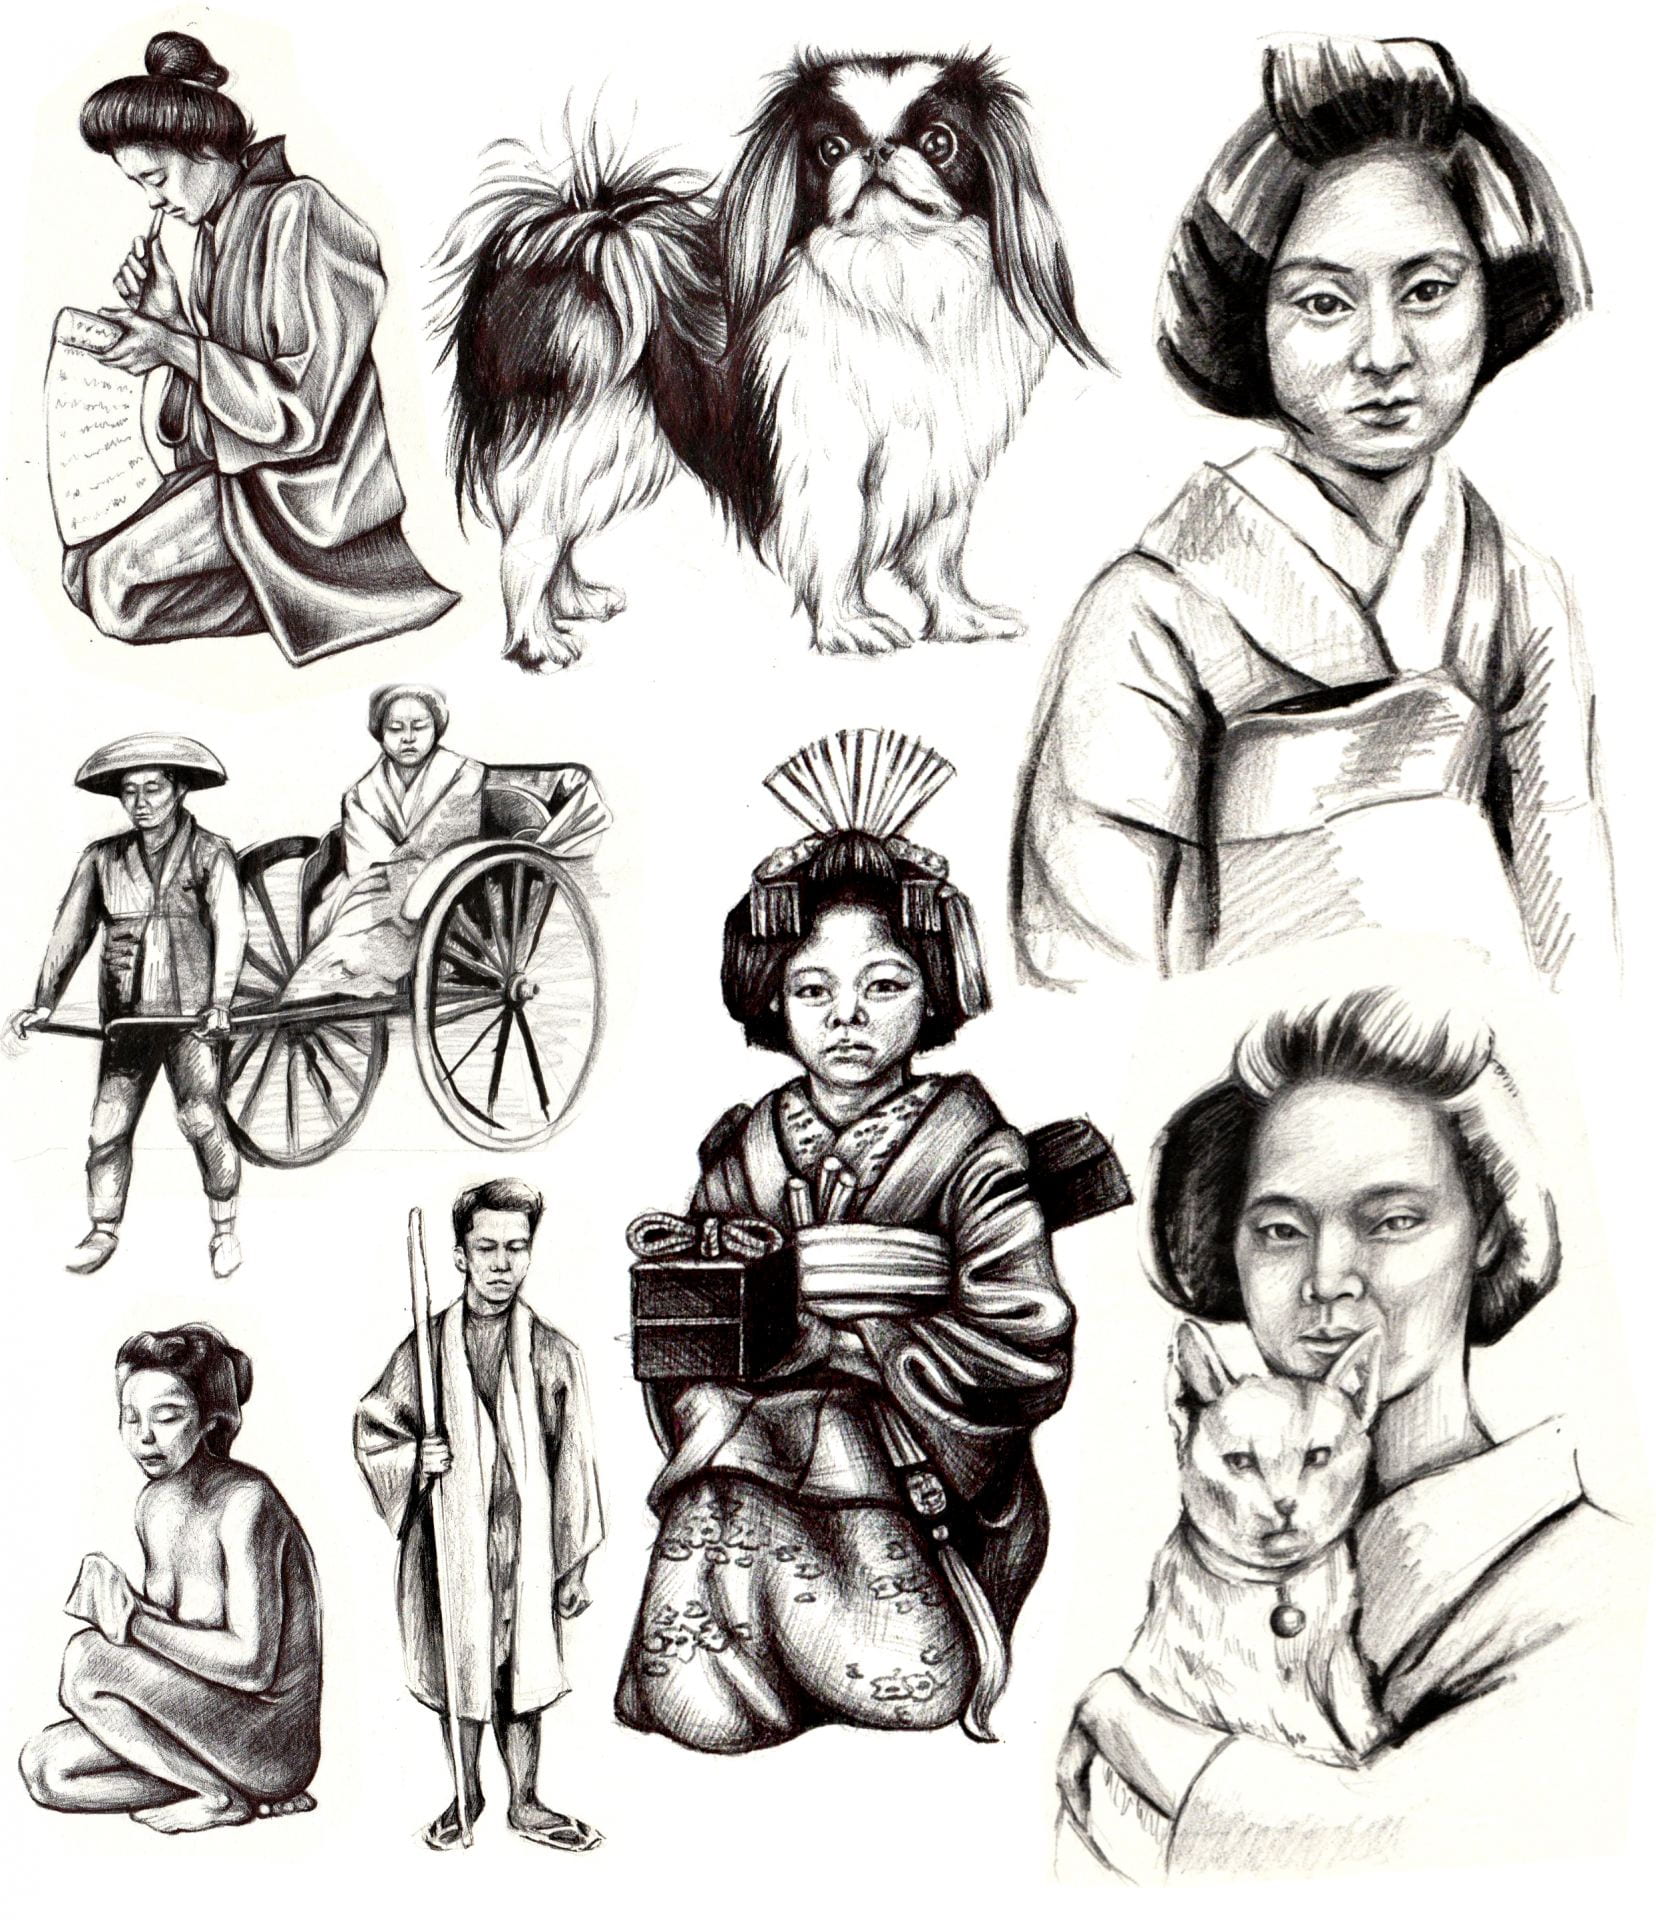 Assorted sketches exploring the people of the Yoshiwara.